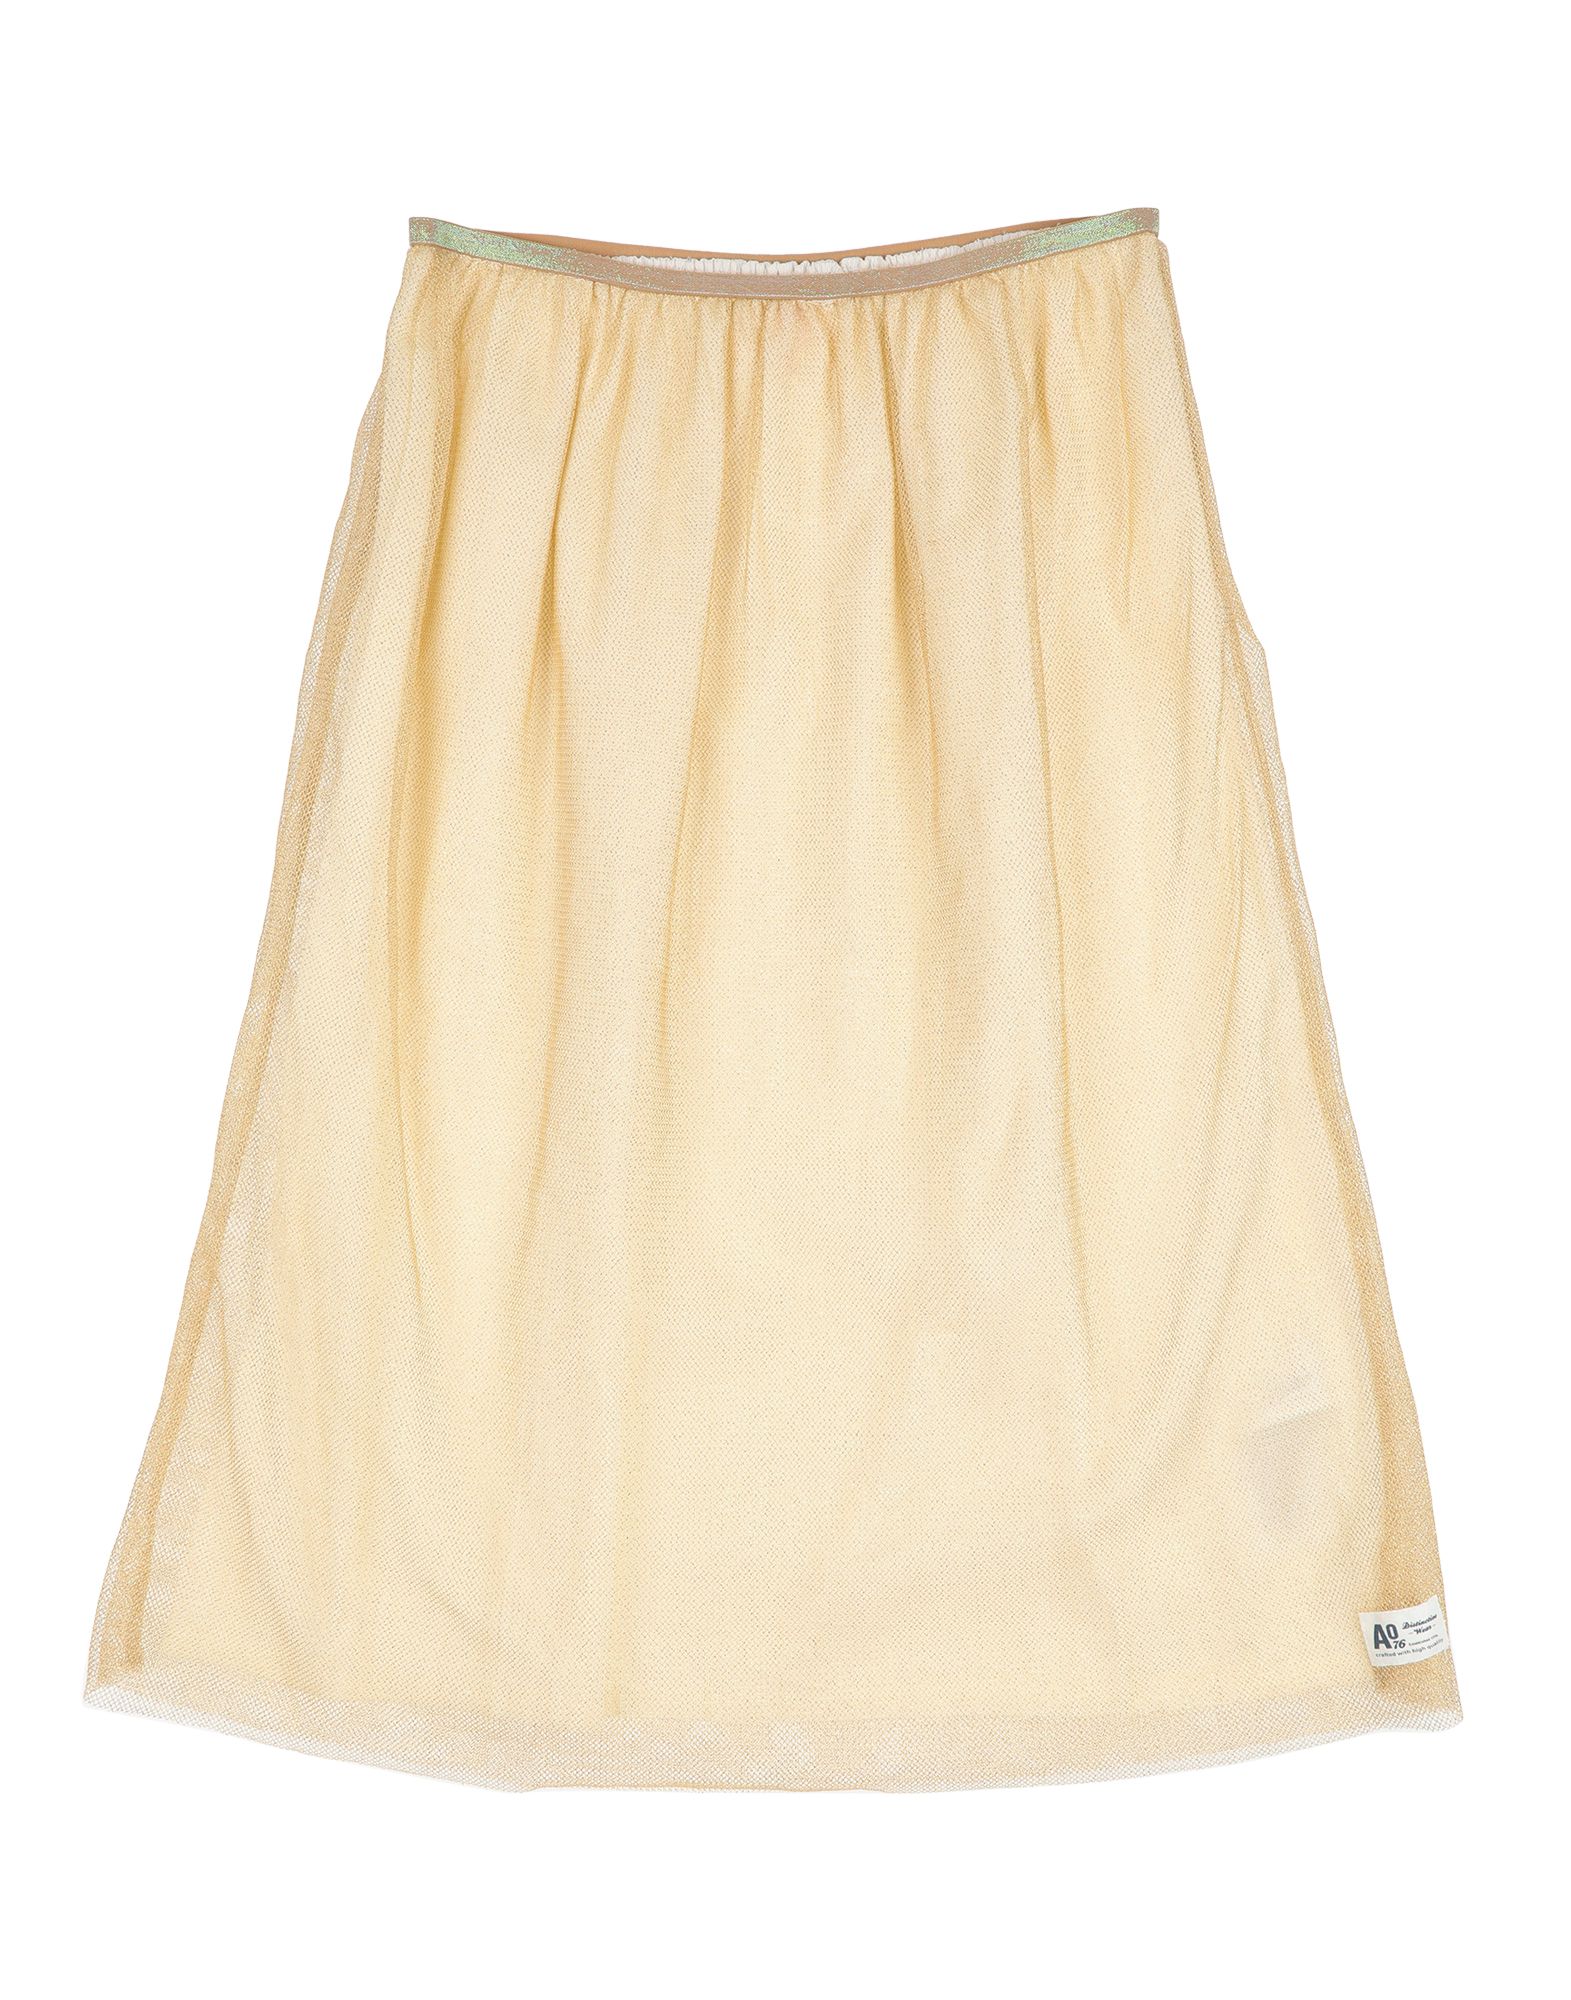 American Outfitters Kids' Skirts In Platinum